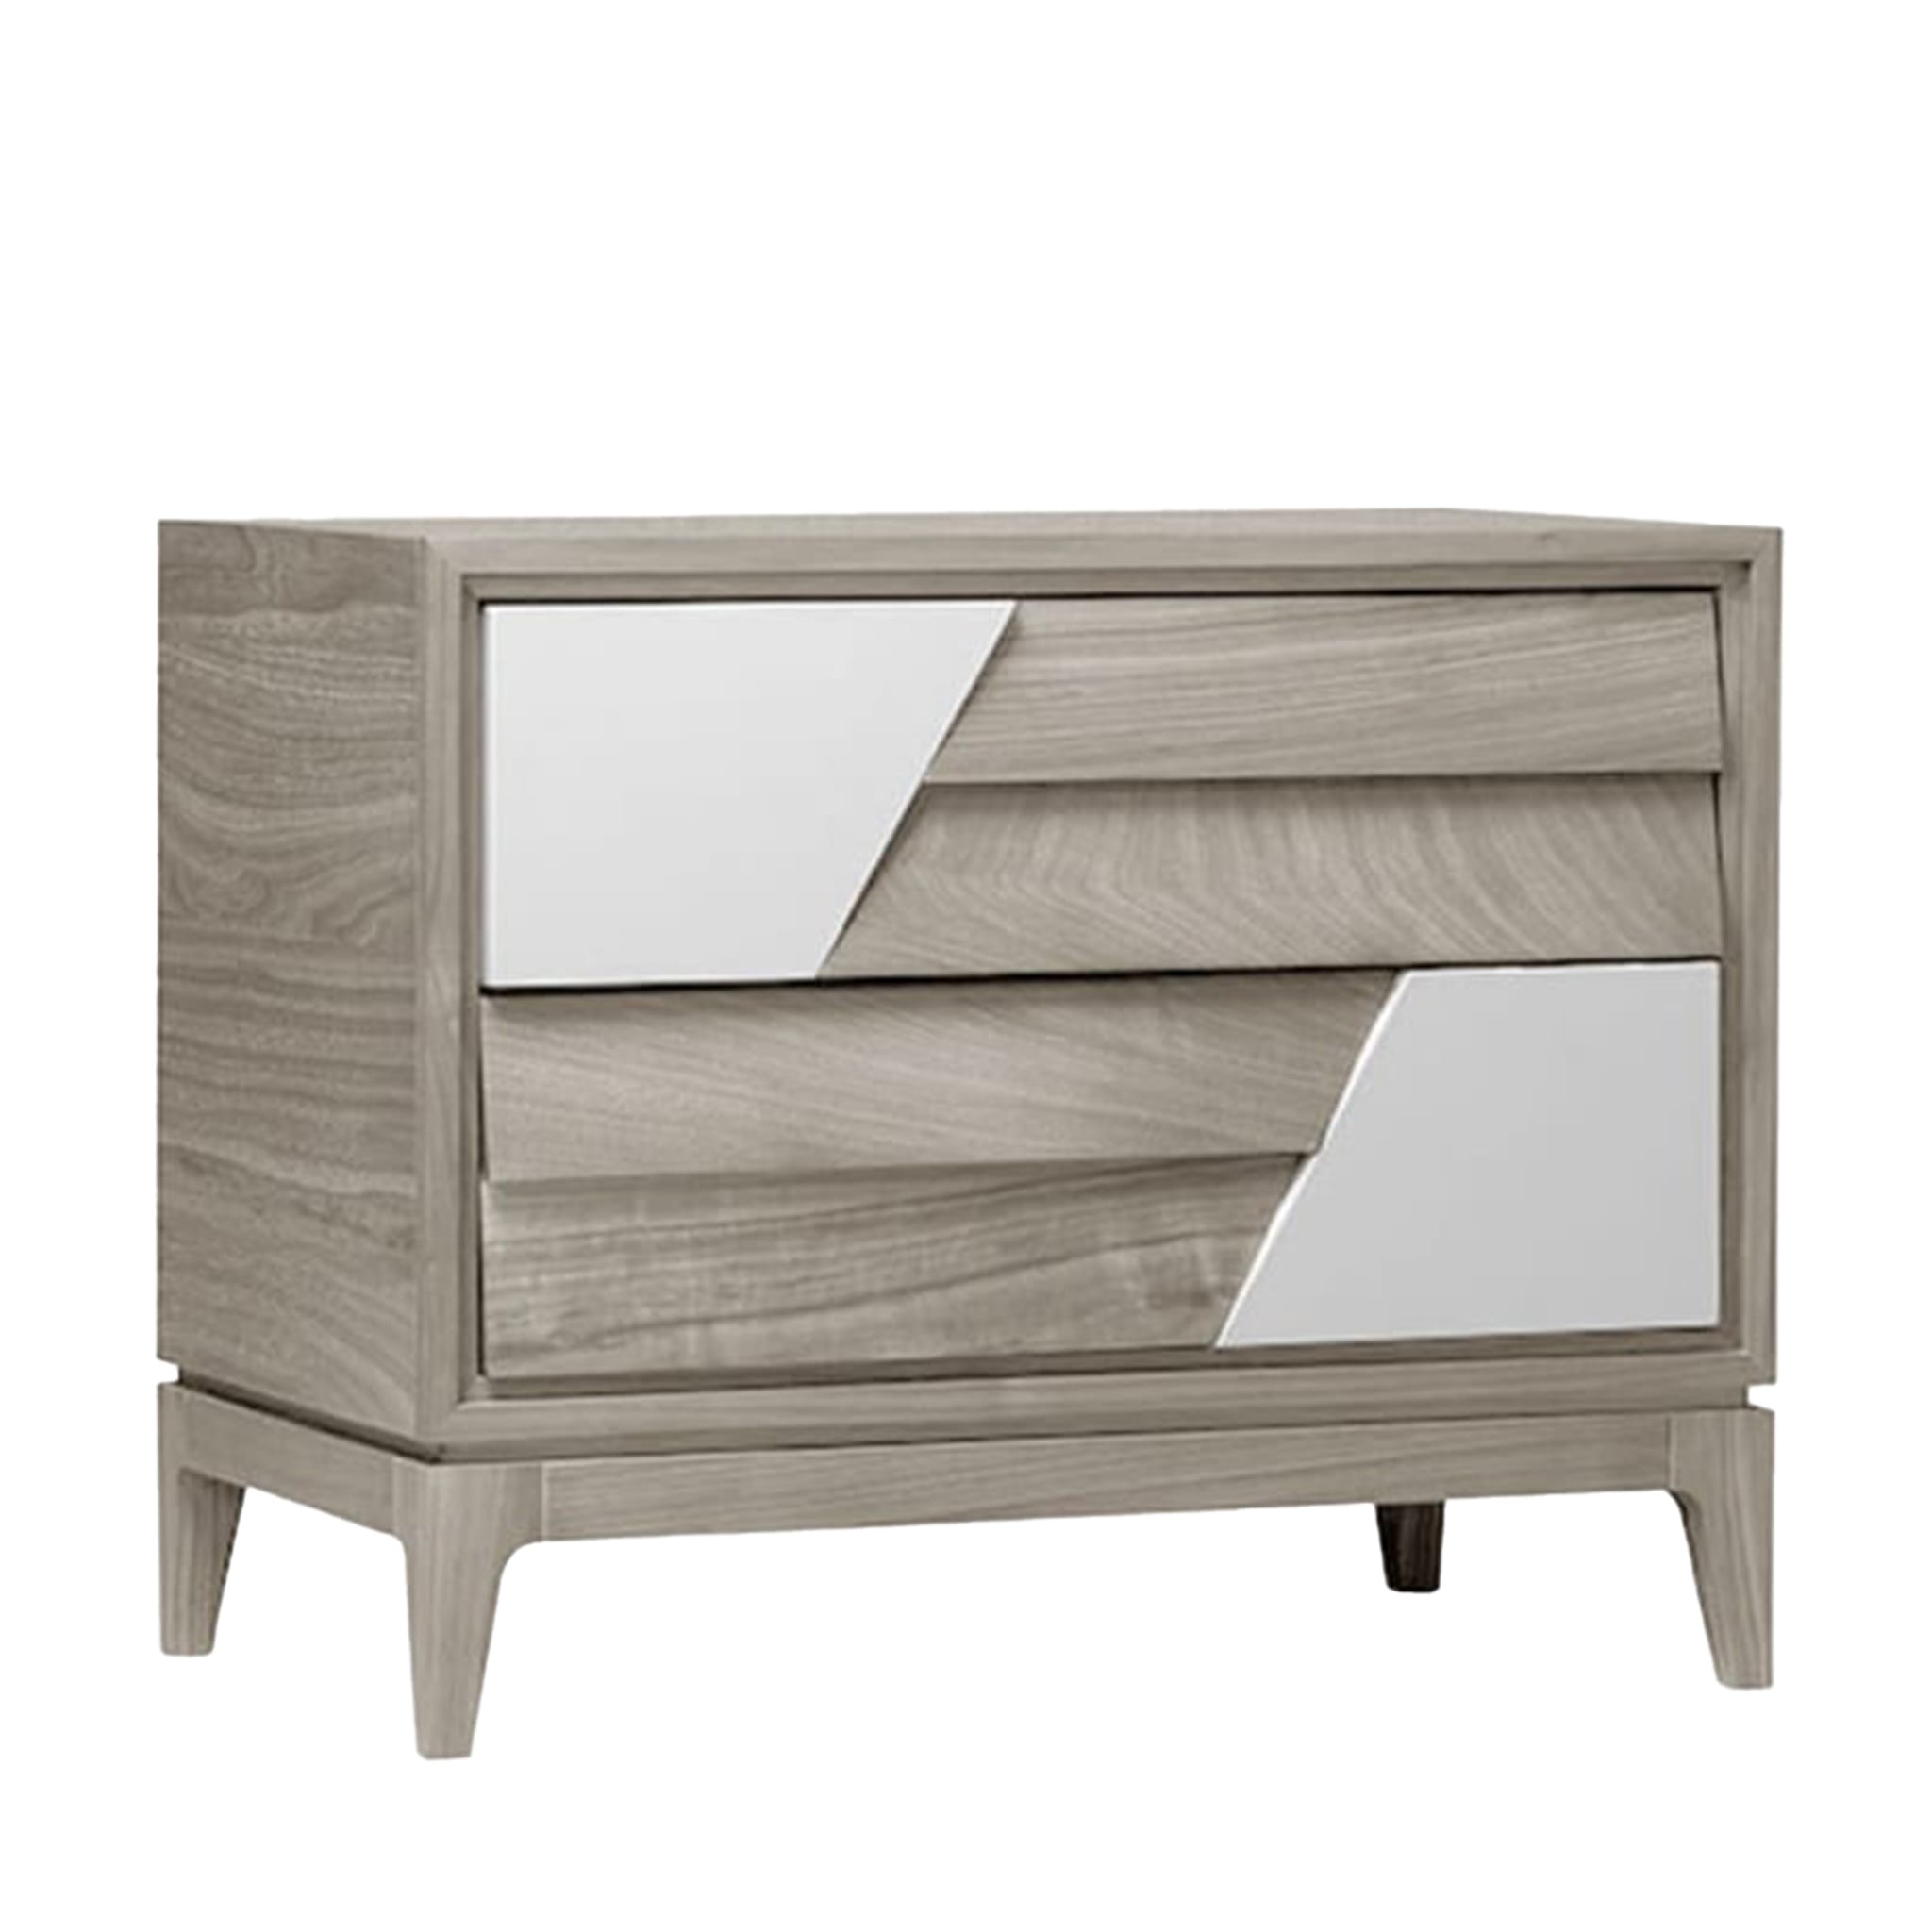 Set of 2 Colore Bedside Table #1 - Main view